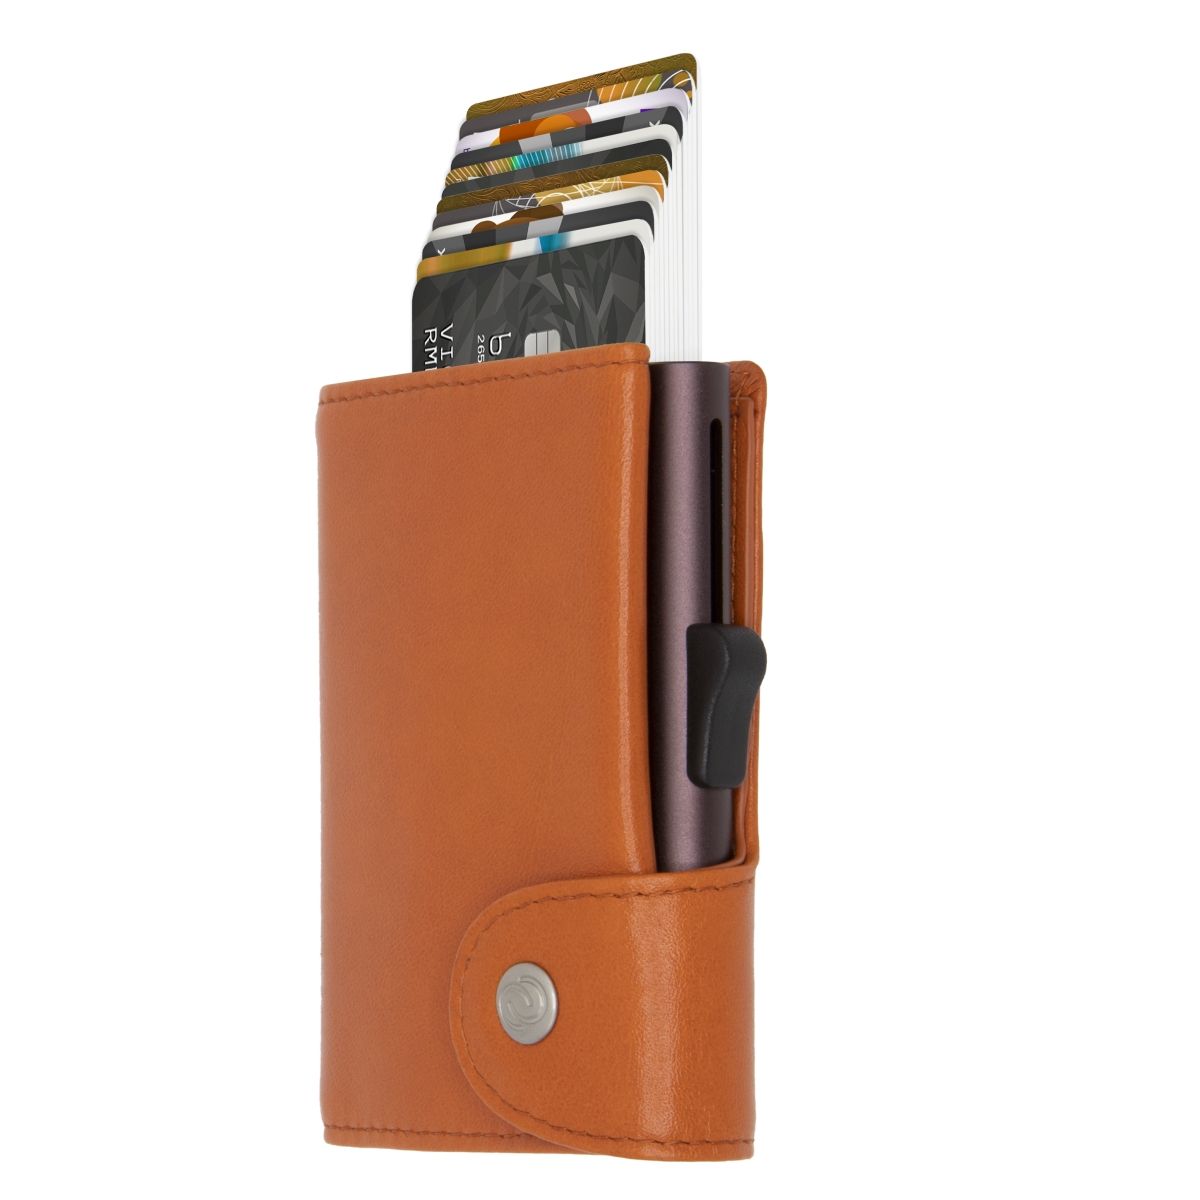 C-Secure XL Aluminum Wallet with Genuine Leather and Coins Pocket - Chestnut